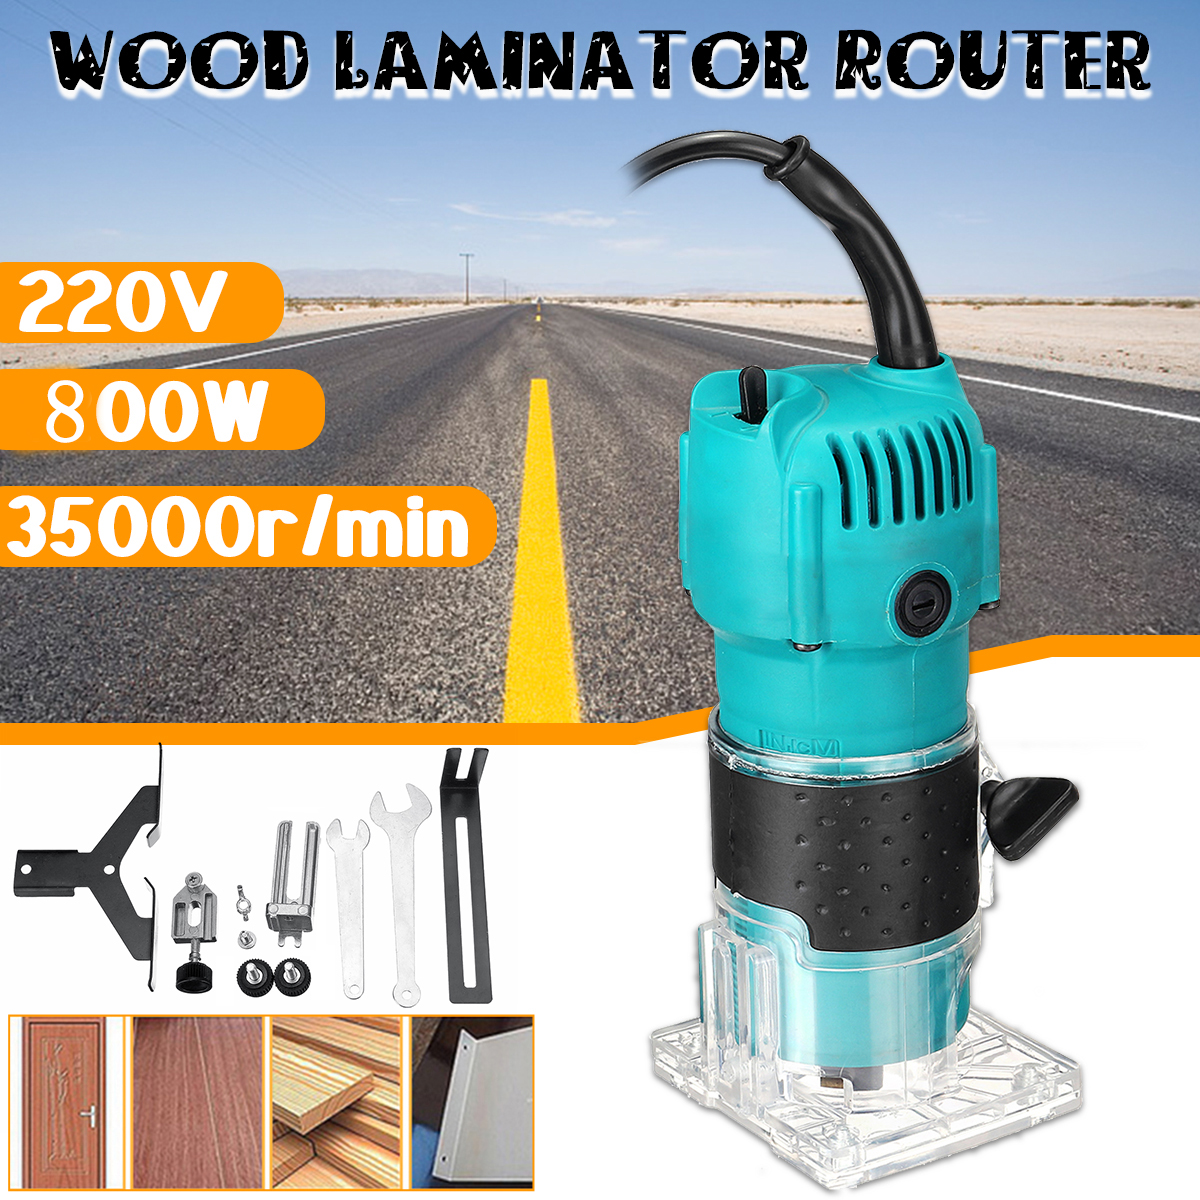 CoCocina 220V 800W 35000r/min Electric Hand Trimmer Wood Laminator Router Joiners Tool 